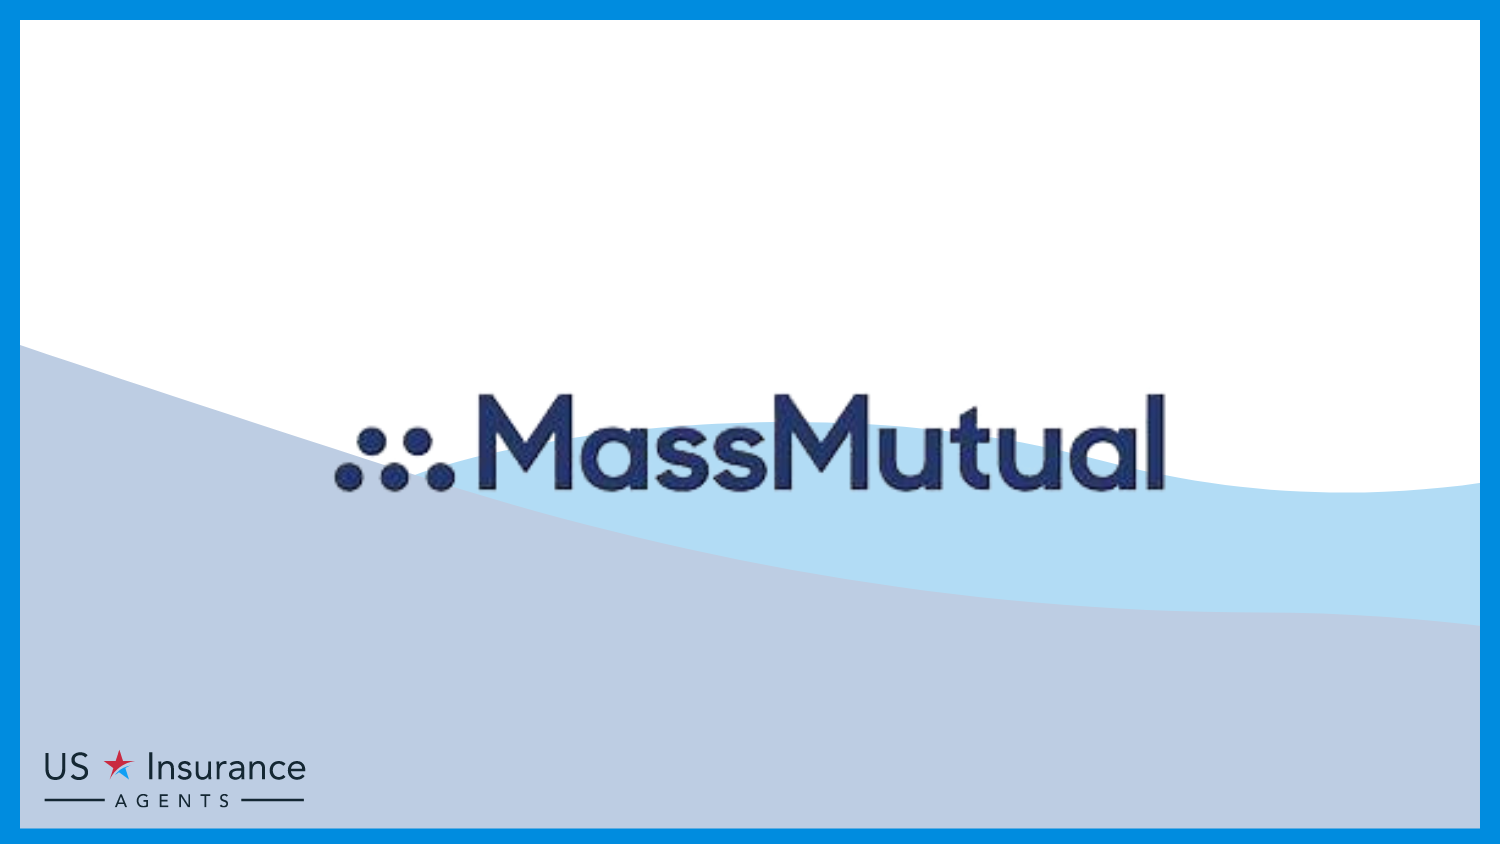 MassMutual: Best Life Insurance for High-Net-Worth